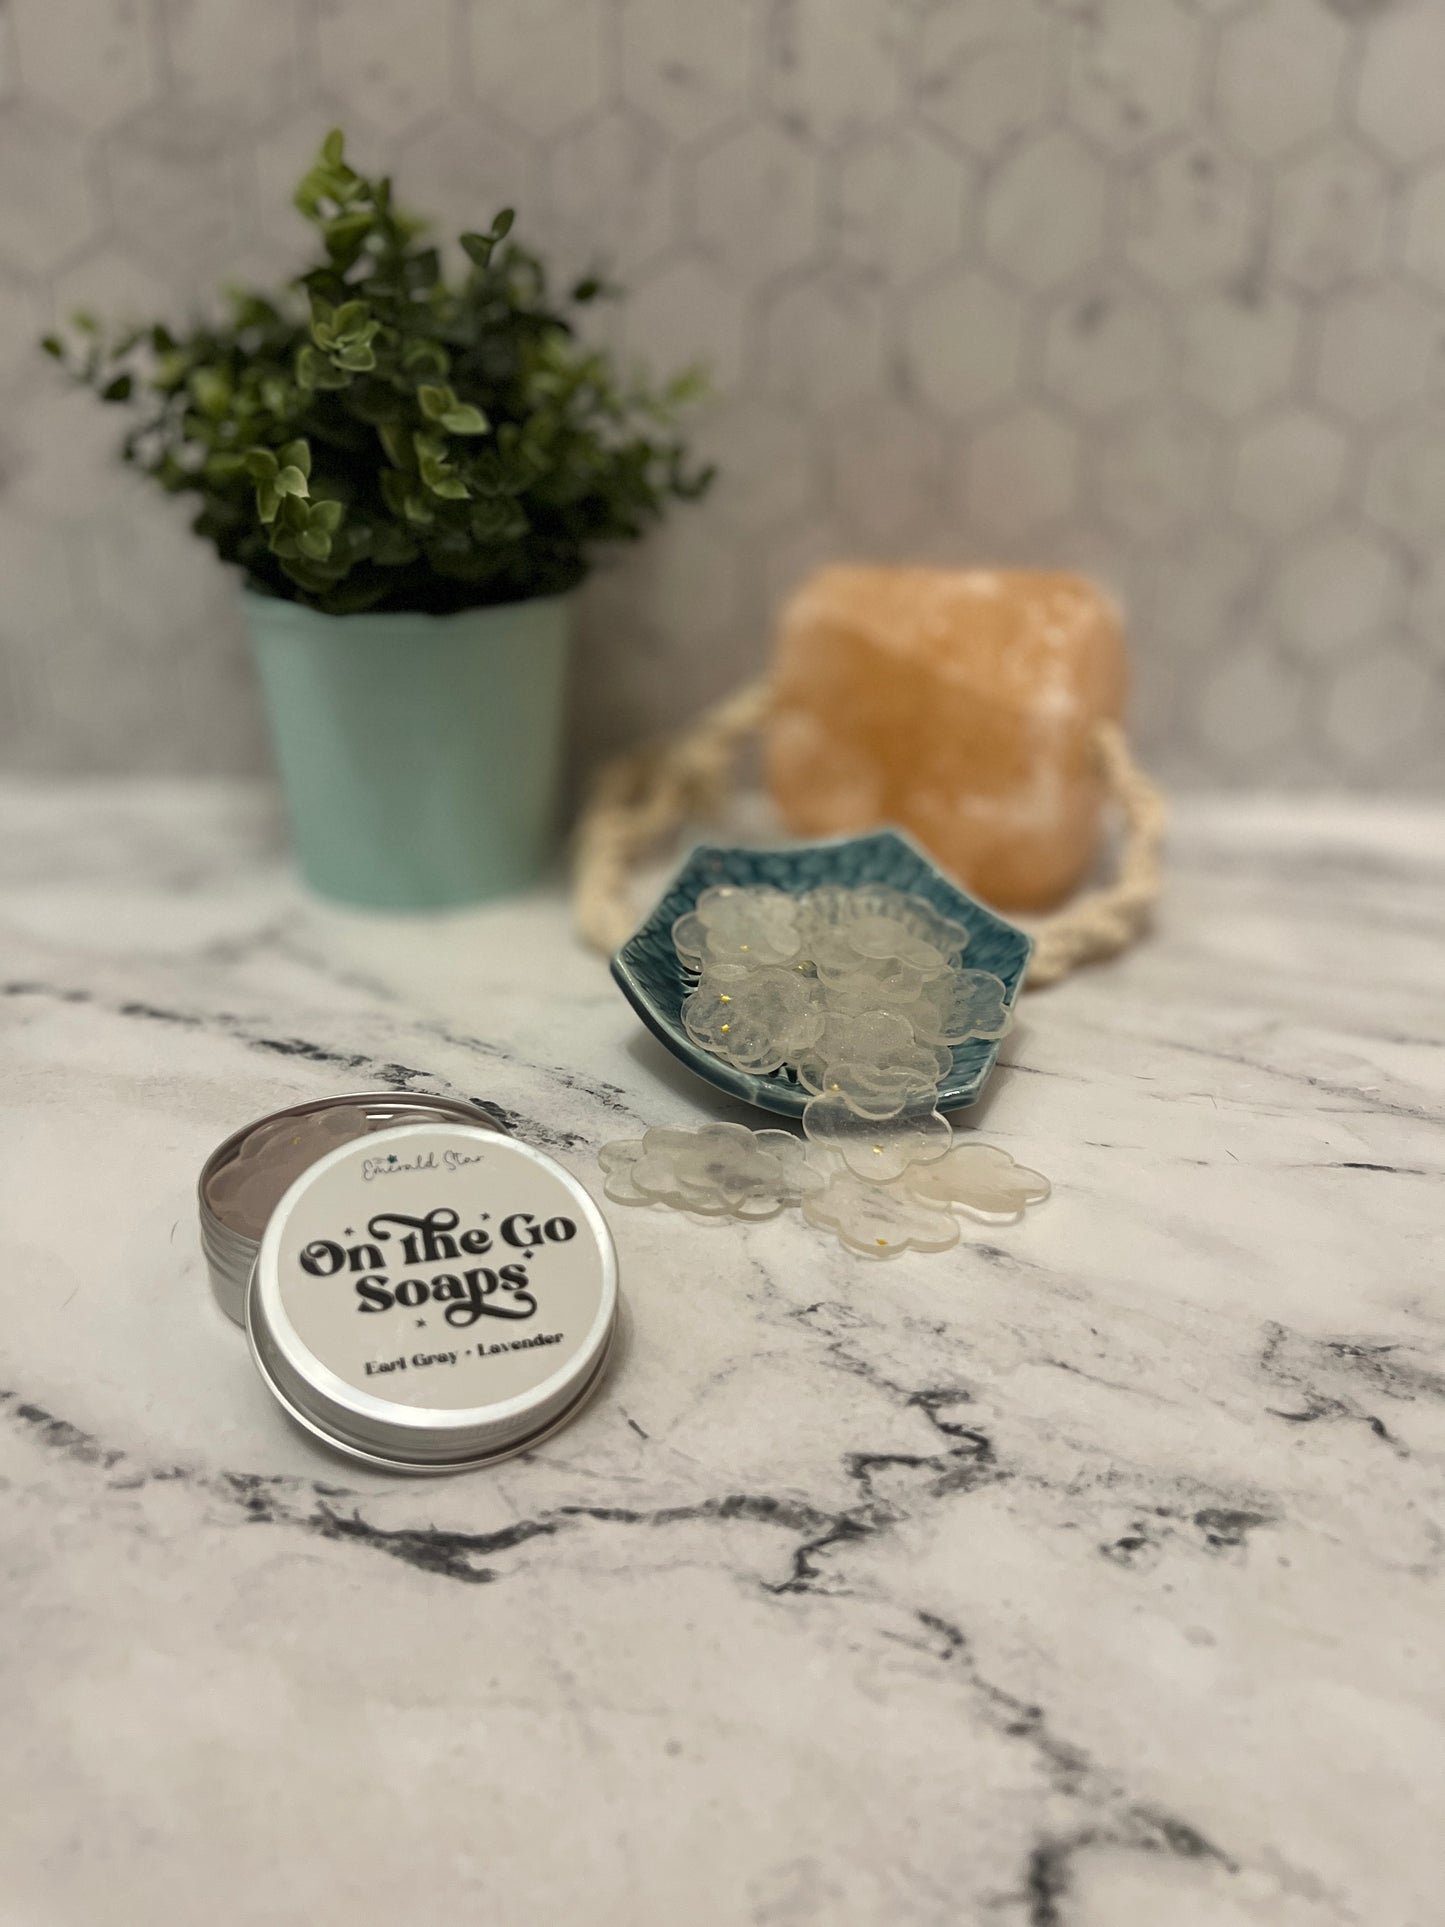 Single Use Soaps in a Tin